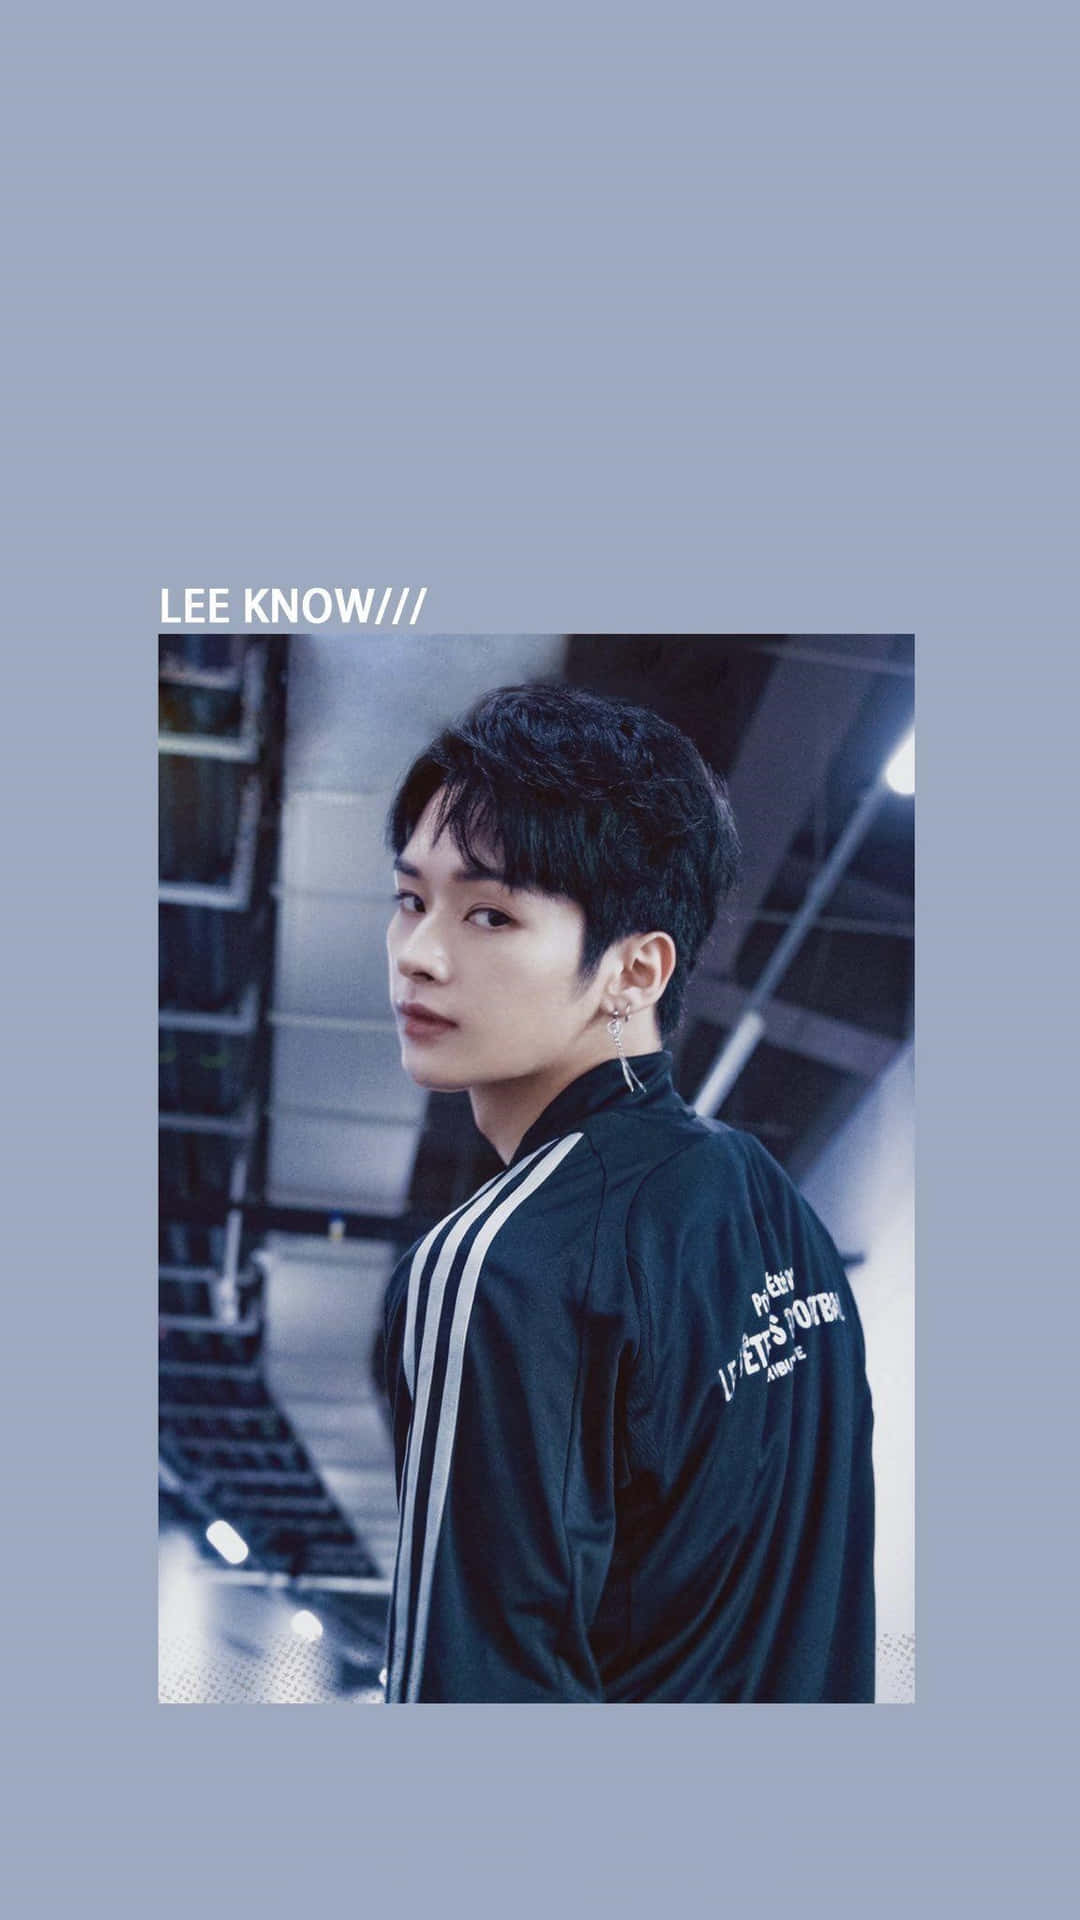 Lee Know Cool Stare Staircase Backdrop Wallpaper